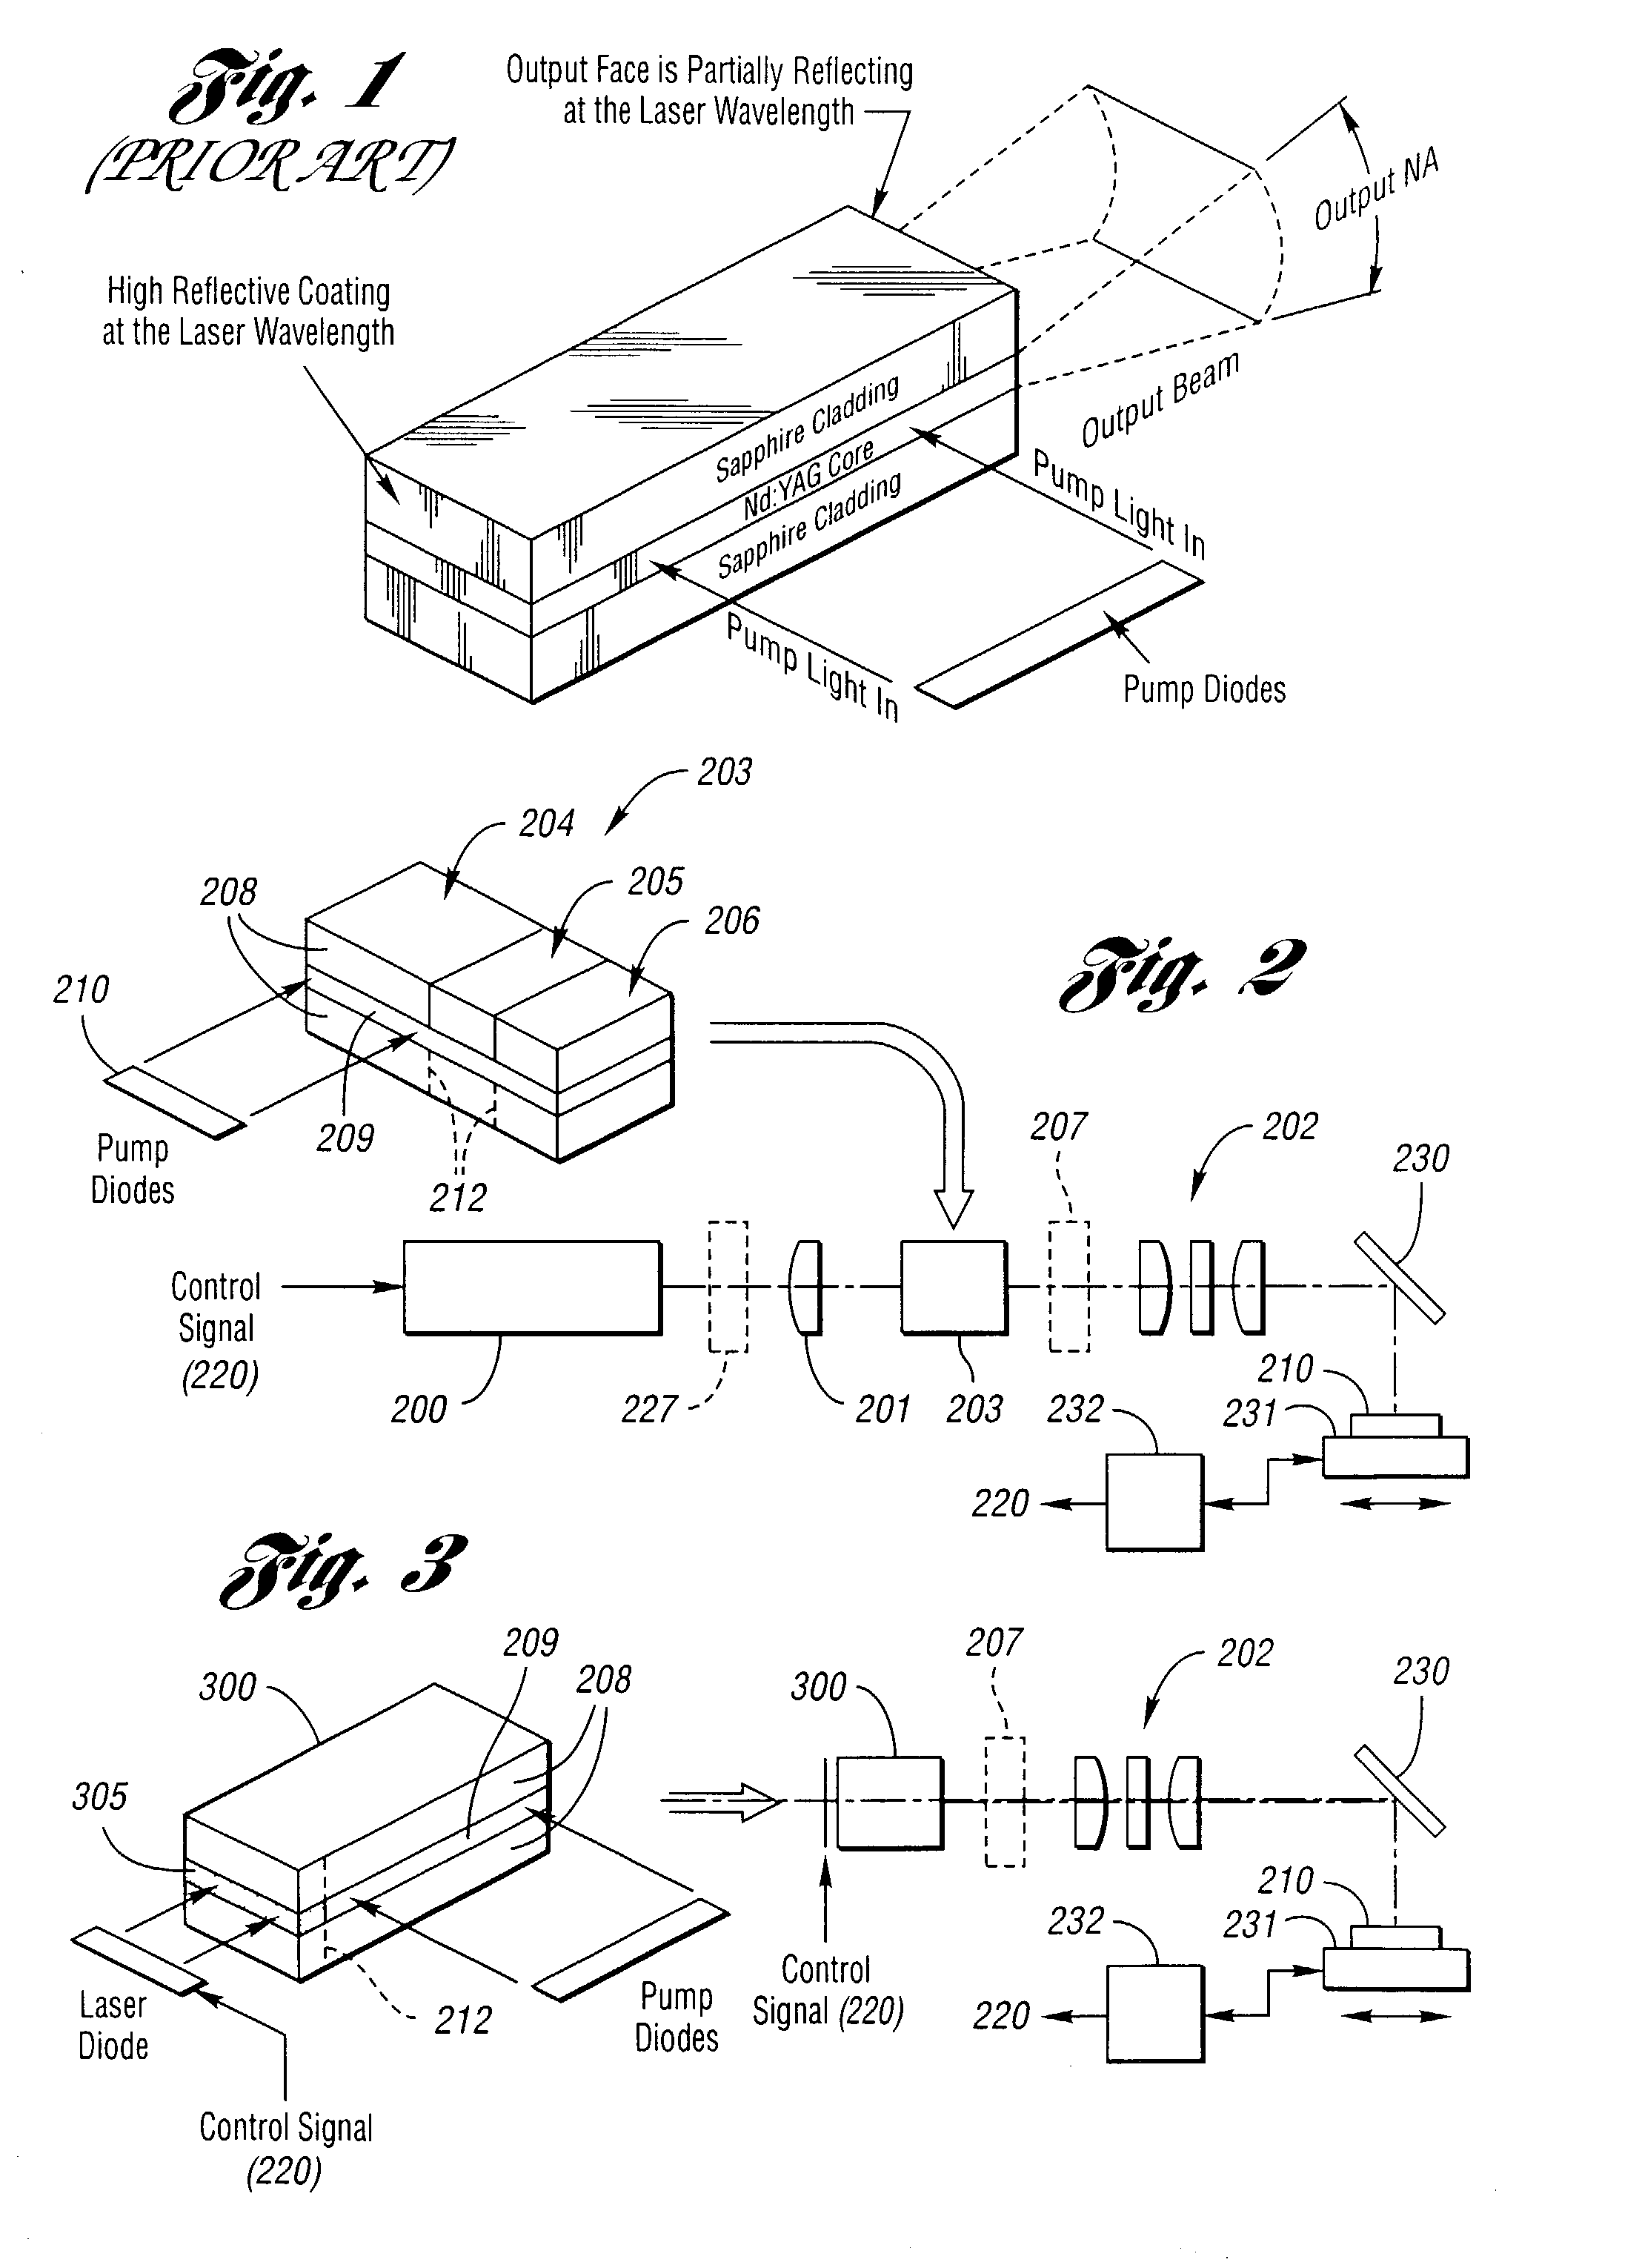 Waveguide architecture, waveguide devices for laser processing and beam control, and laser processing applications